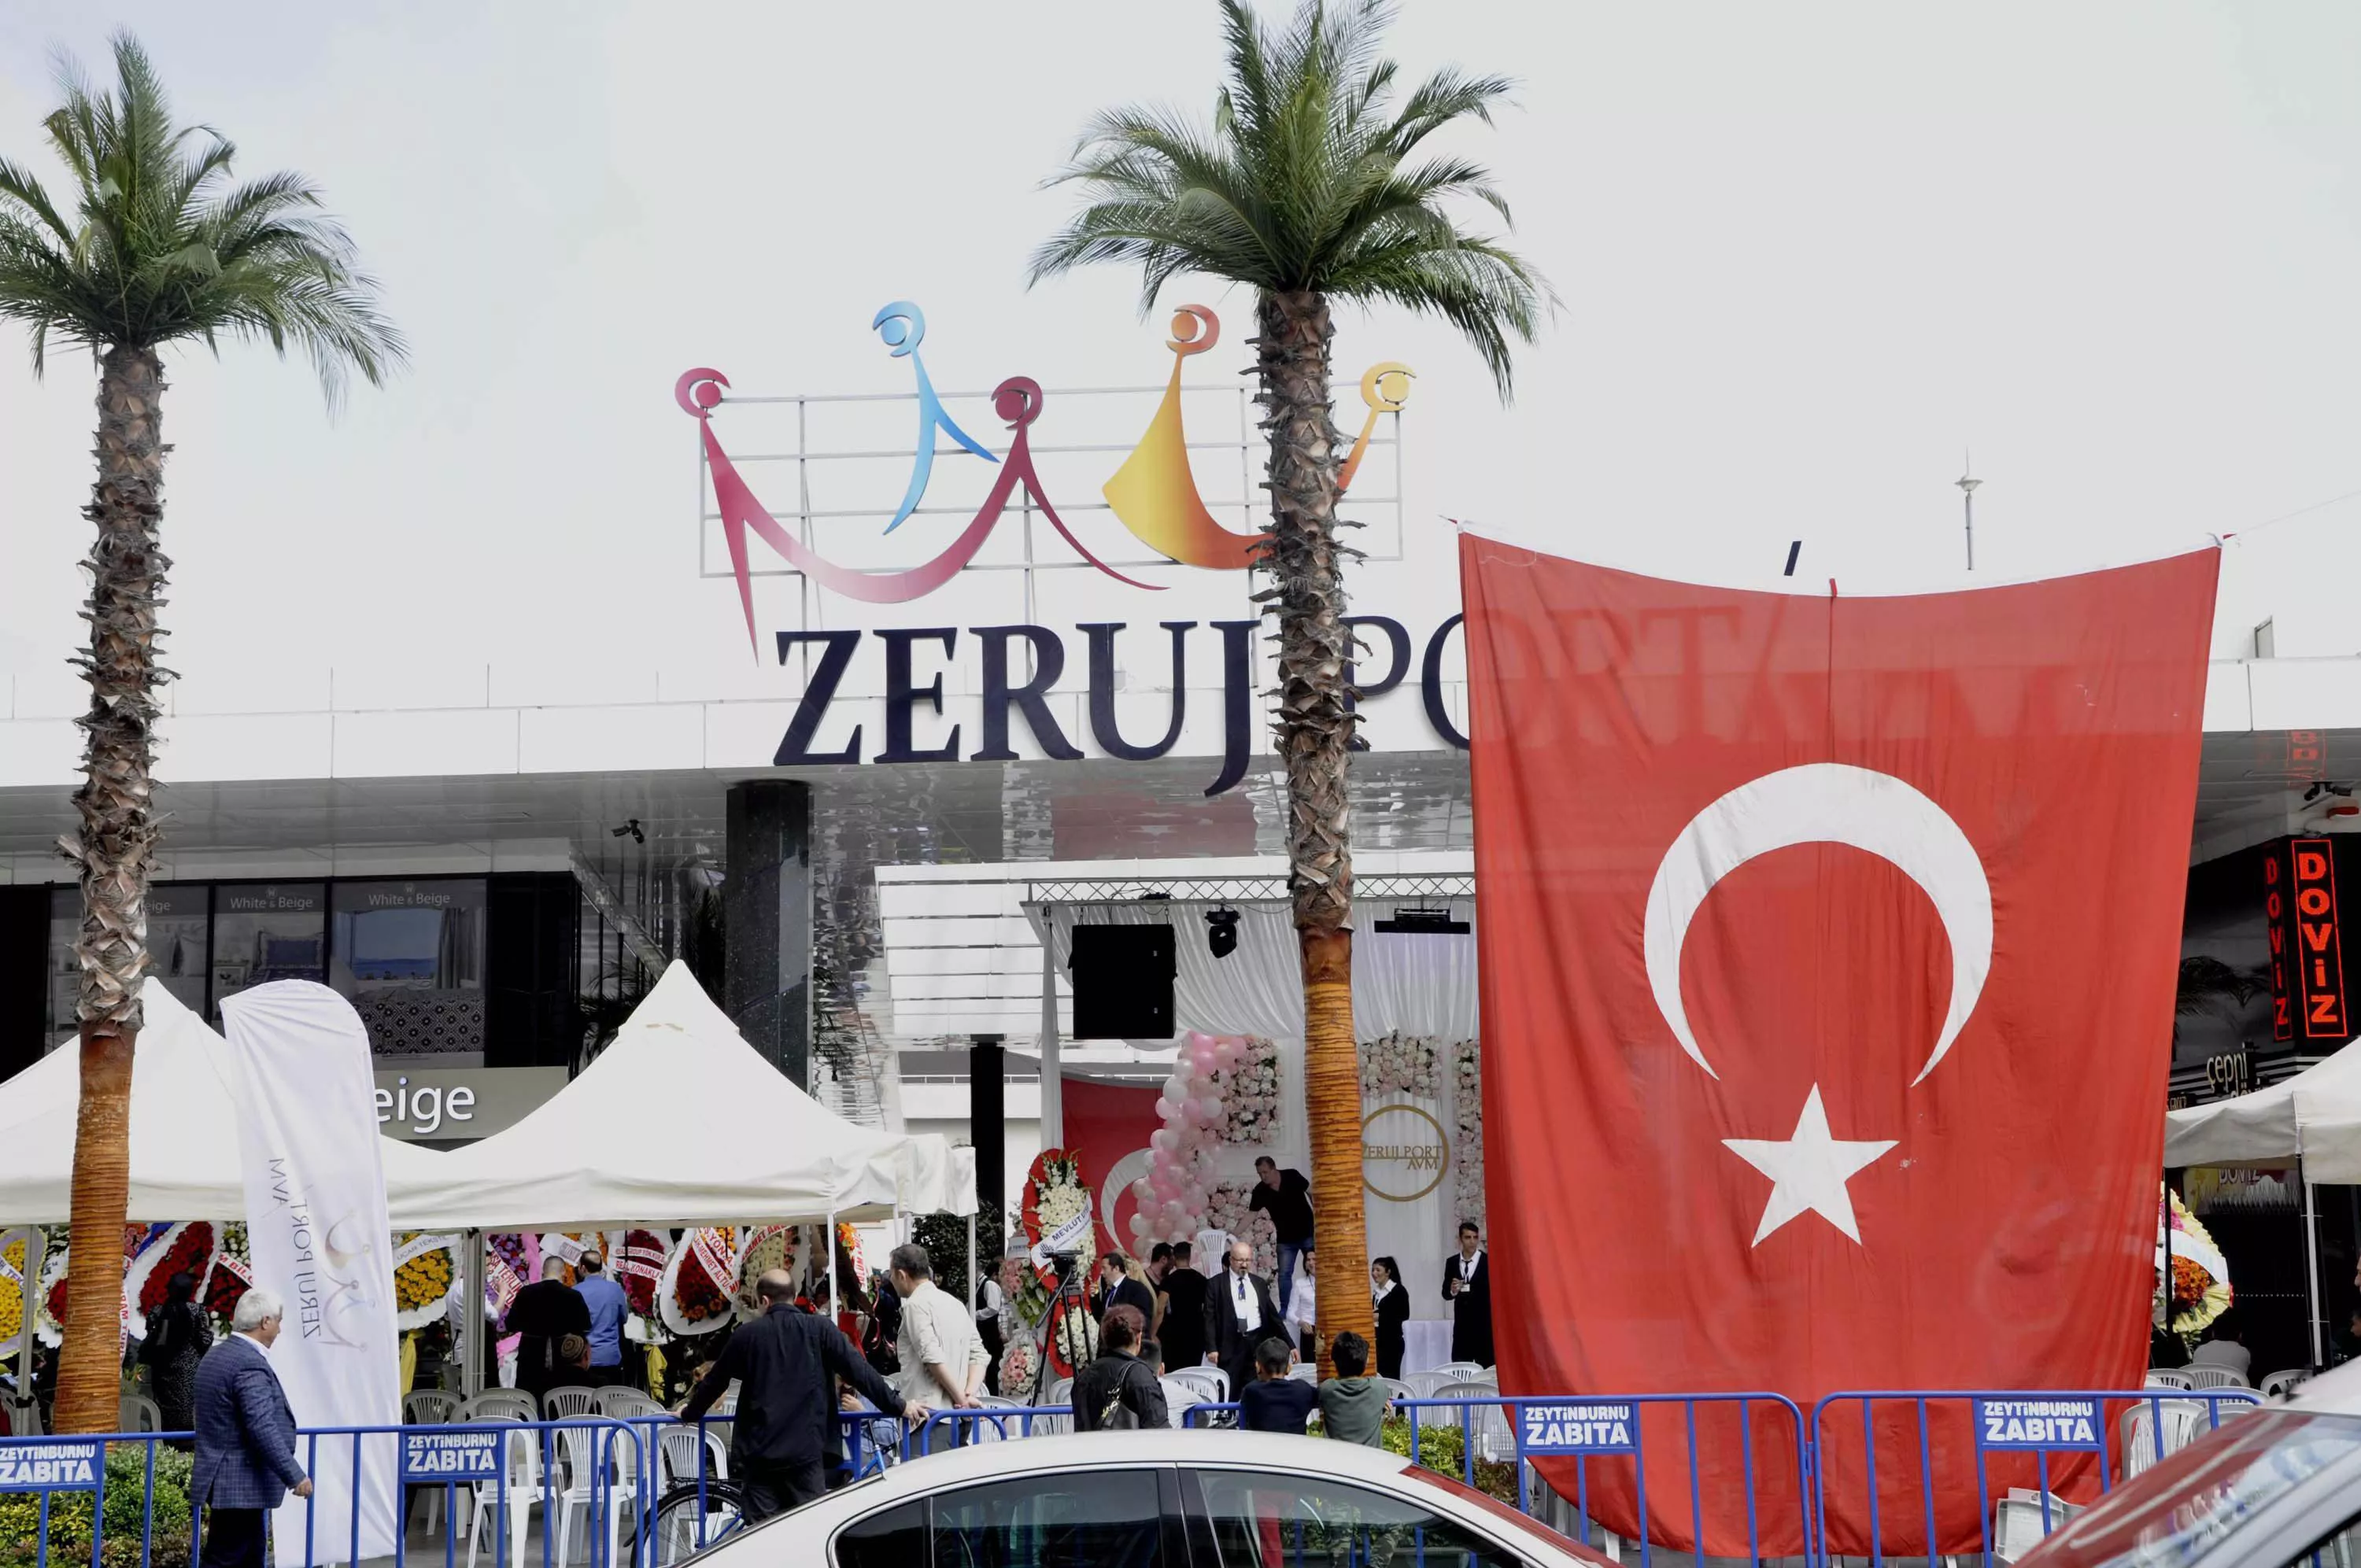 Zeruj Port Shopping Mall in Turkey, central_asia | Handbags,Shoes,Accessories,Clothes,Cosmetics,Sportswear,Swimwear - Country Helper